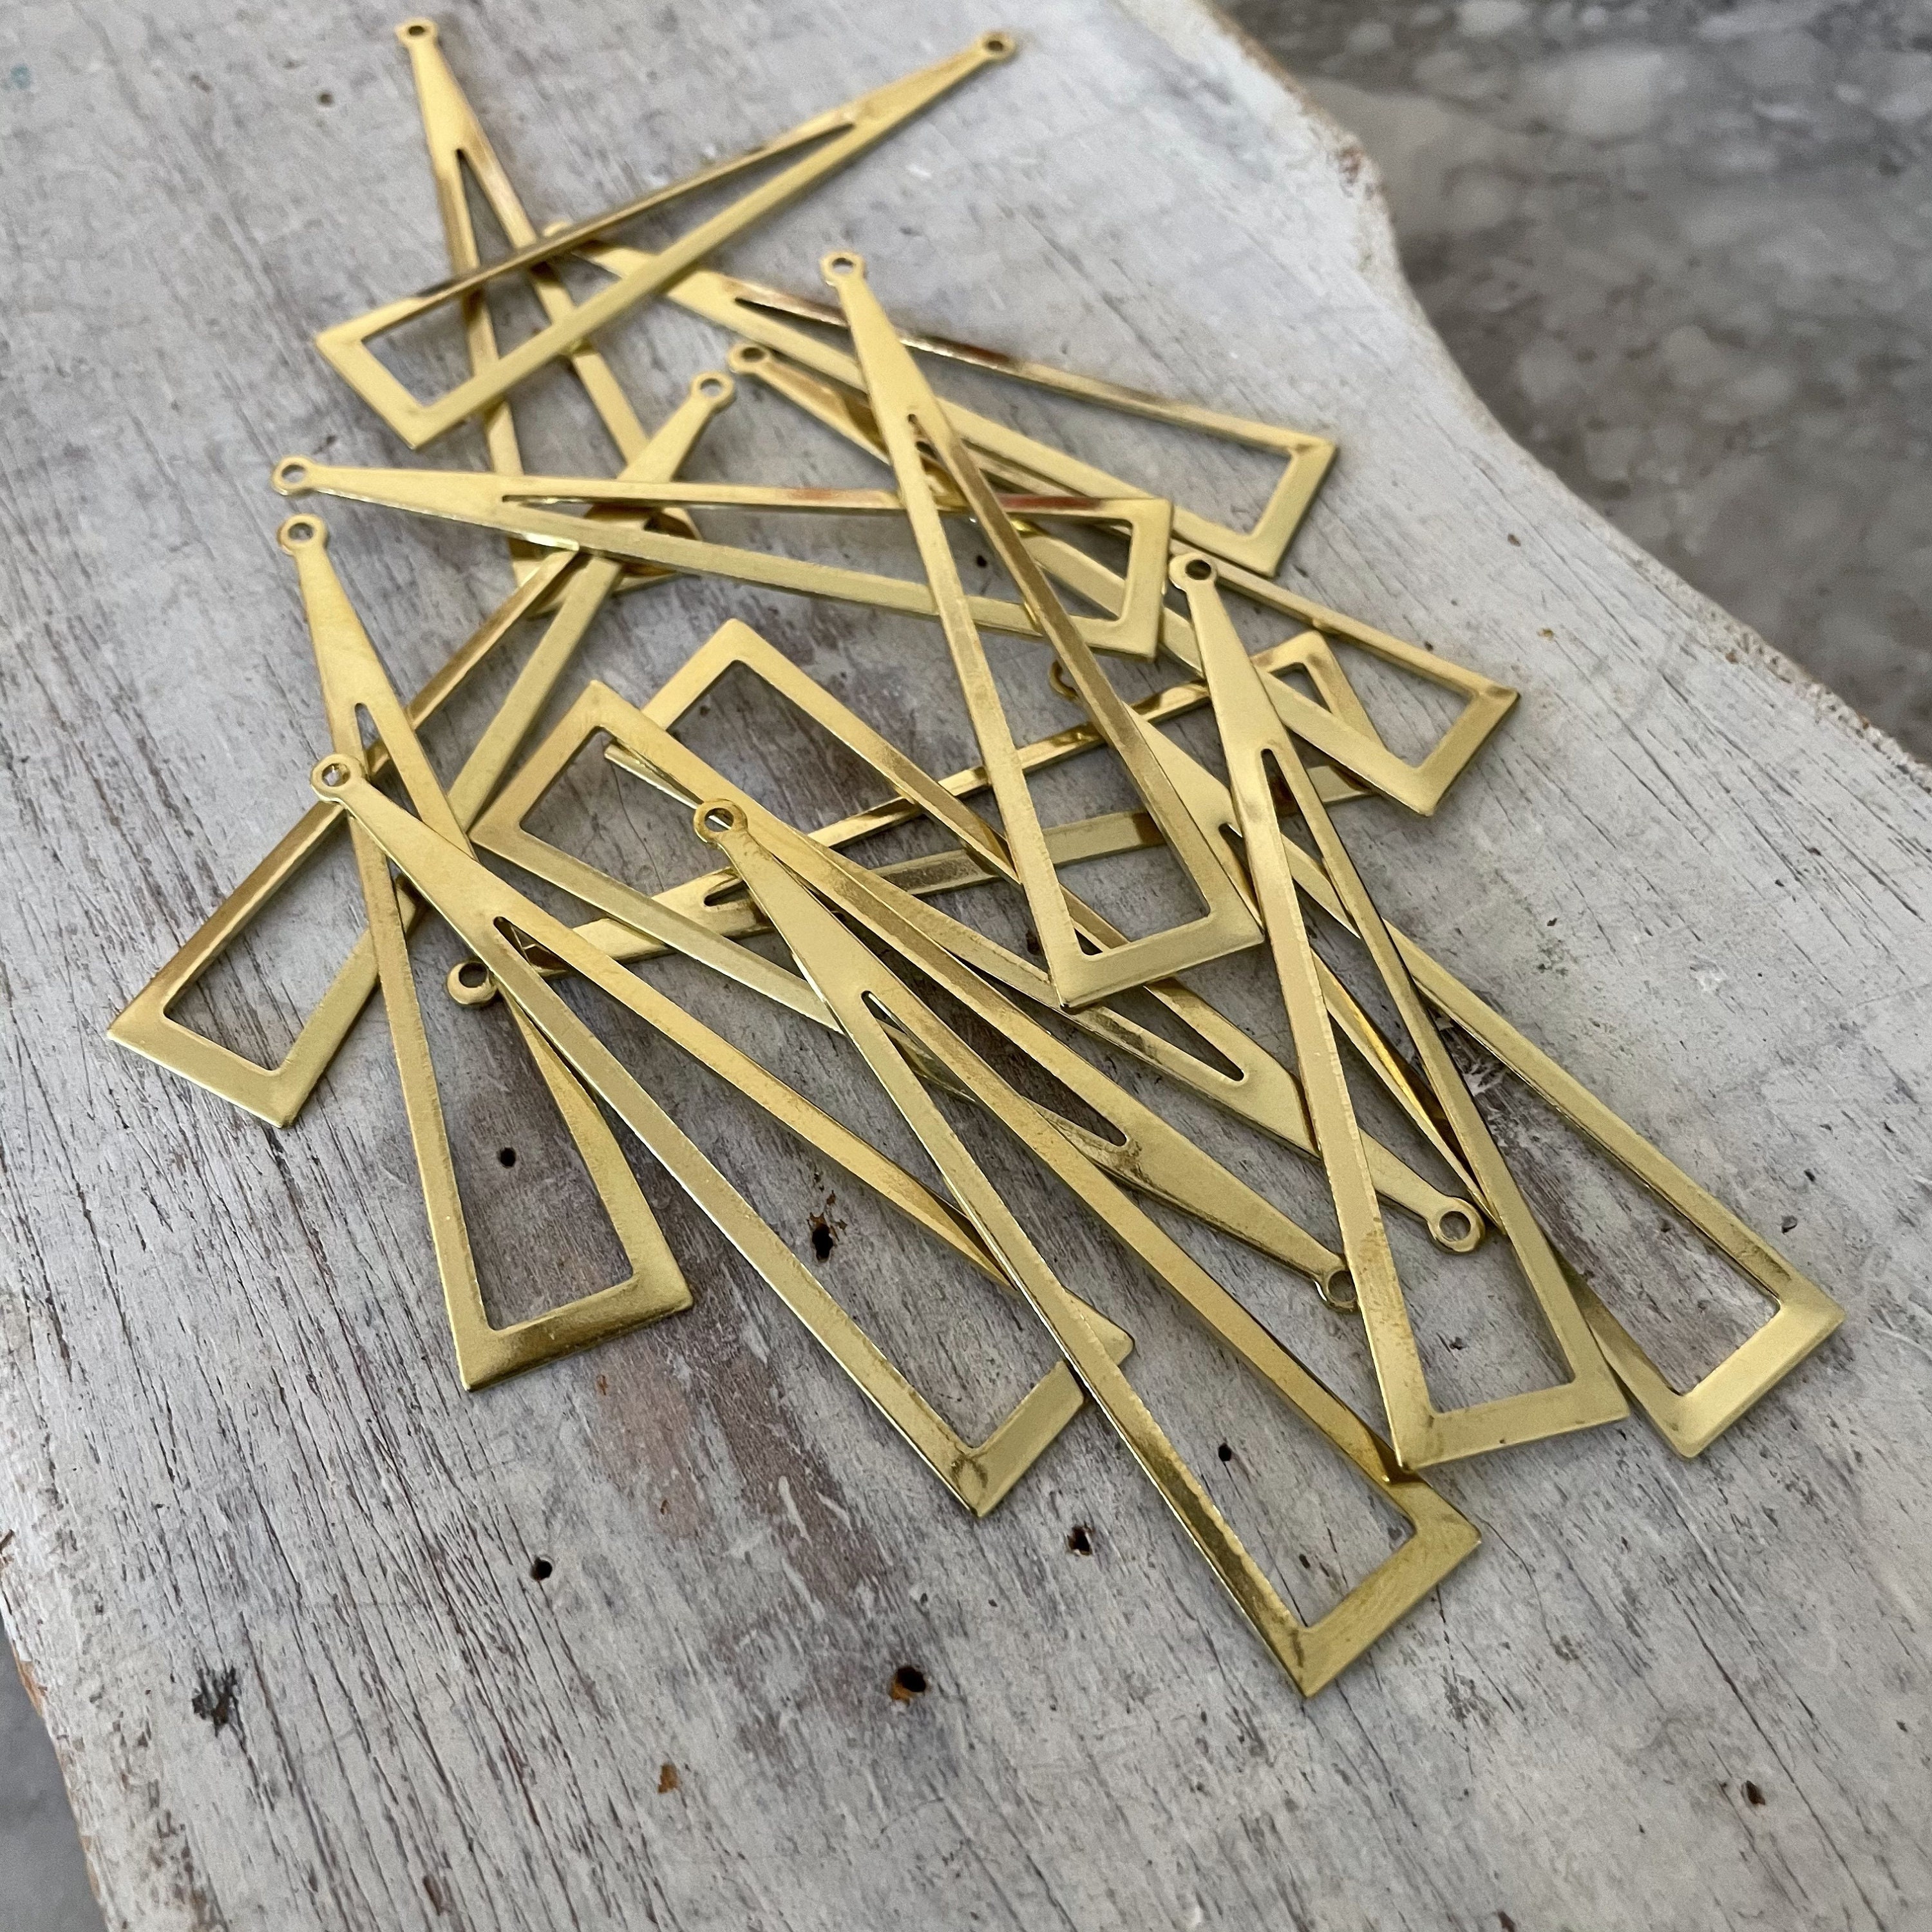 Approx. 14 PCS Raw Brass Earring Findings,One set, endless possibilities.  Wholesale earring findings for jewelry making parts. -3006